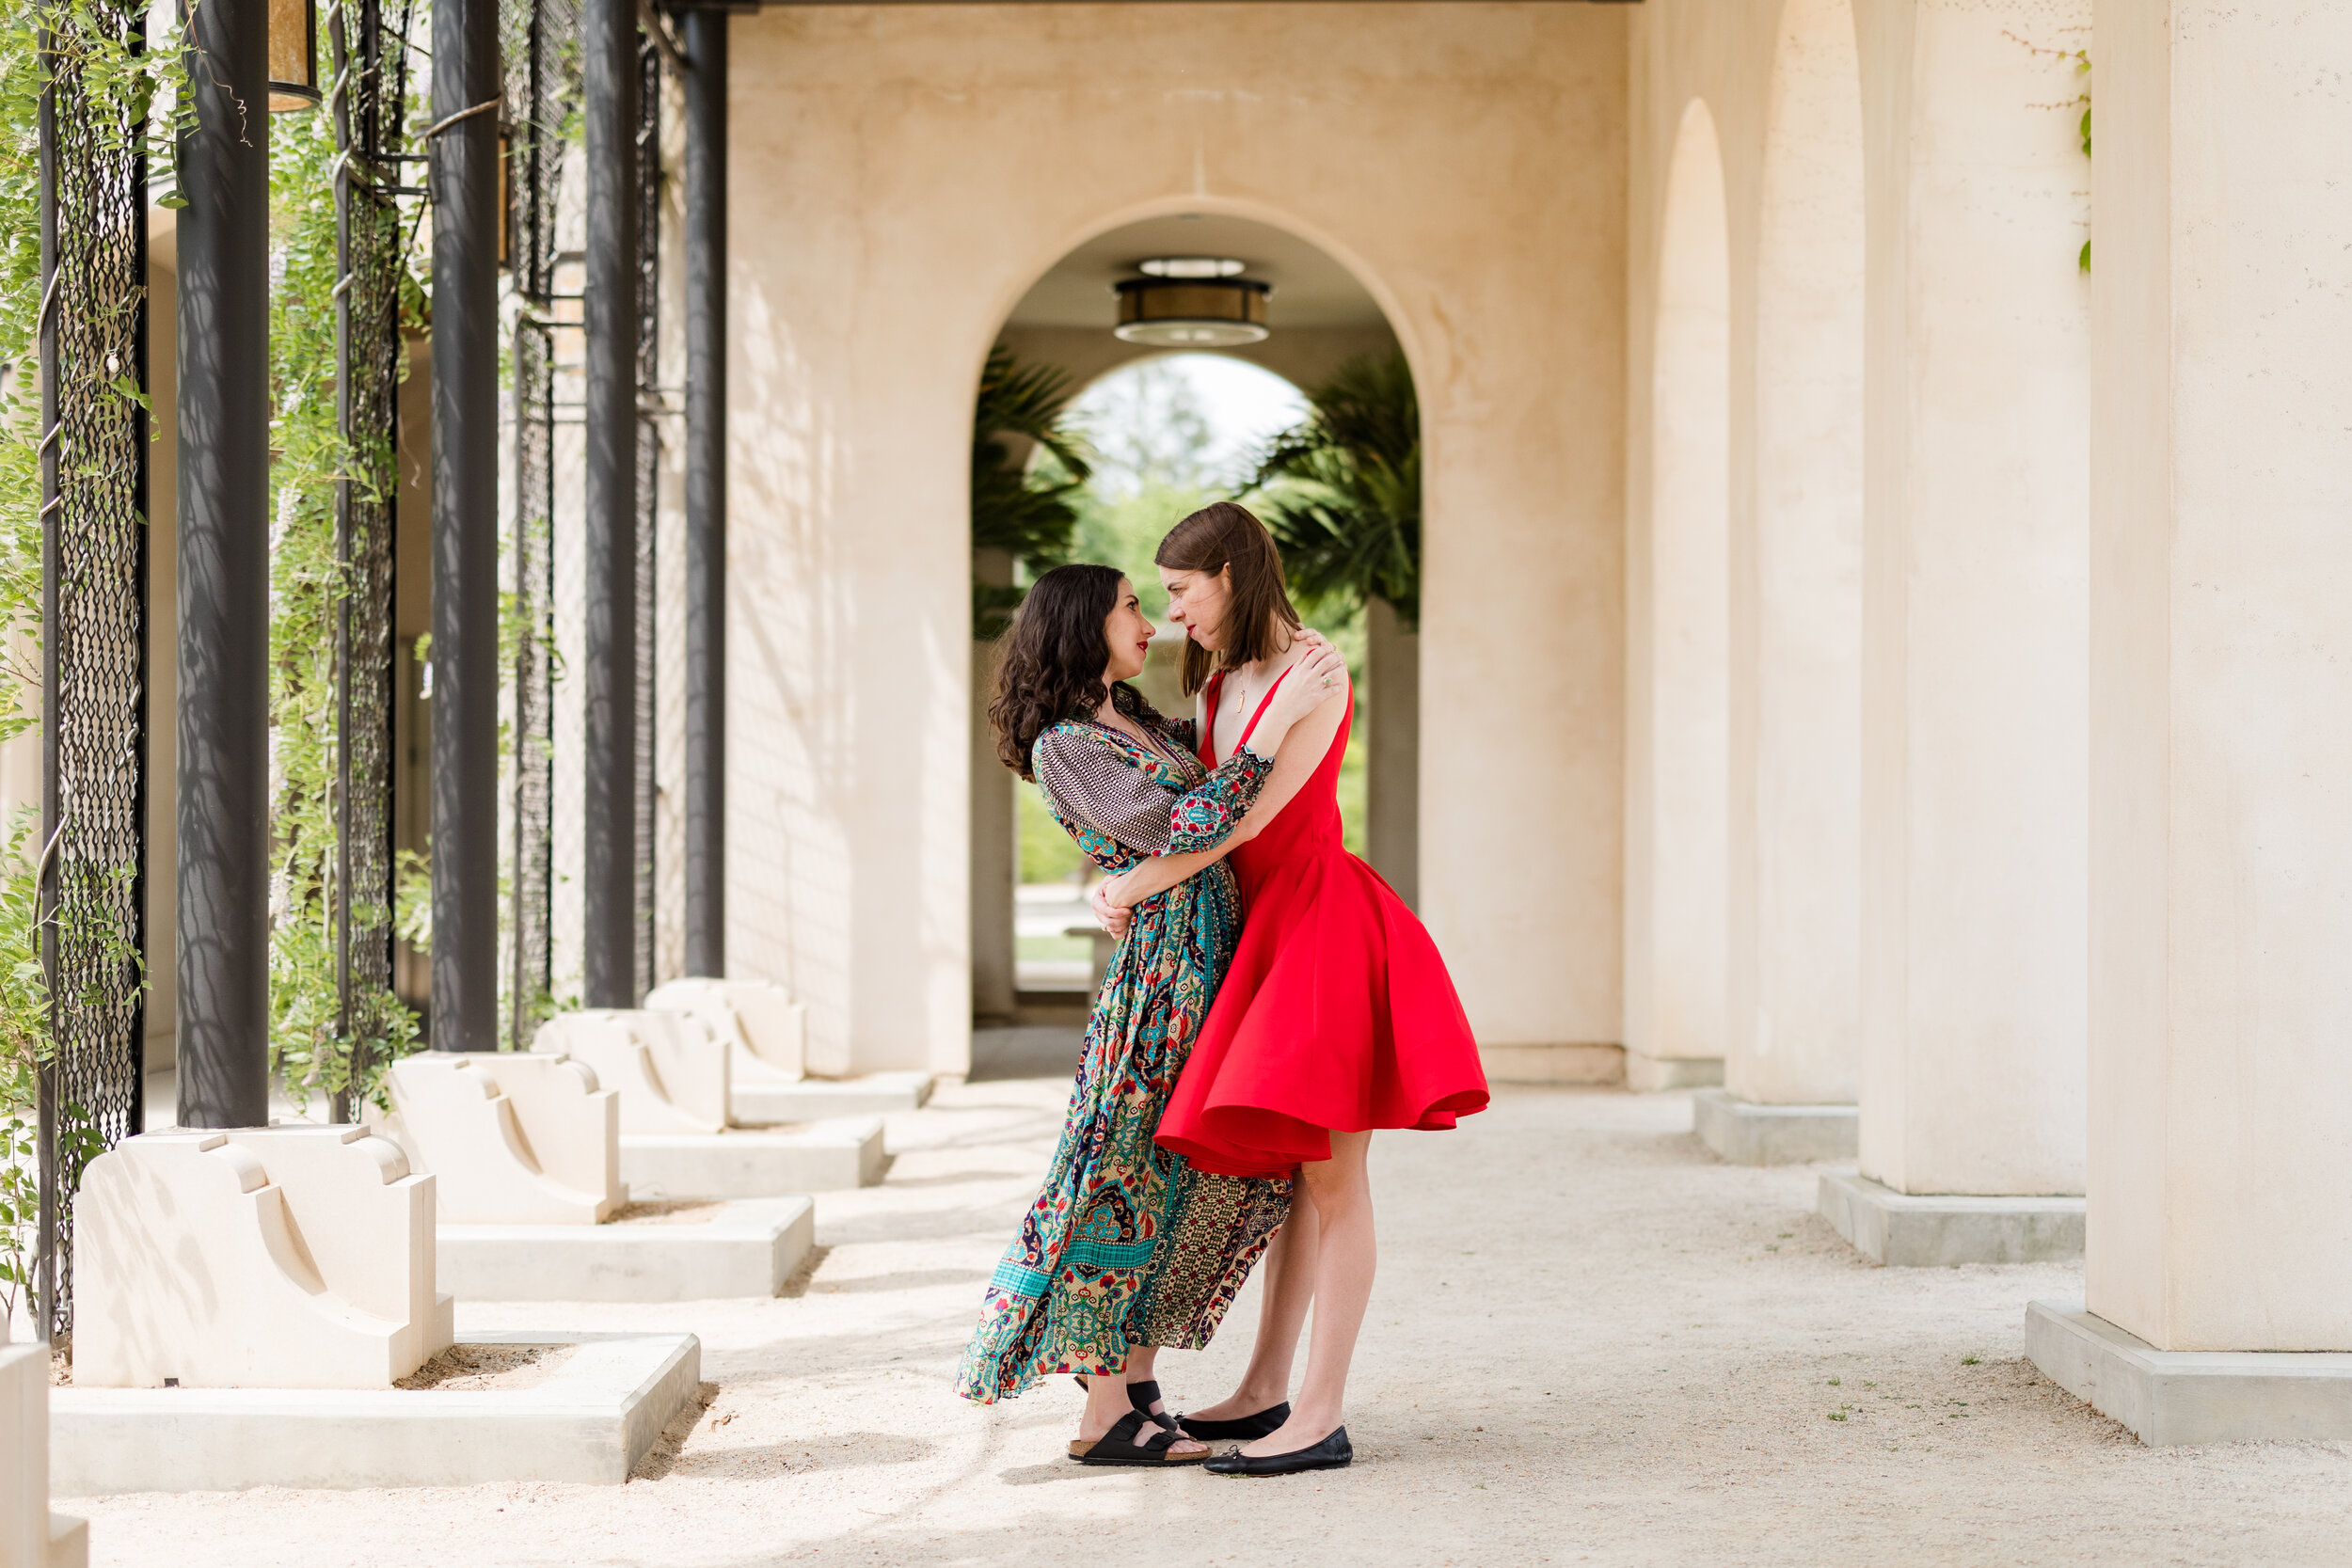 Dorothy-and-Kate-LGBTQ-Longwood-Gardens-Engagement-Session-176.jpg